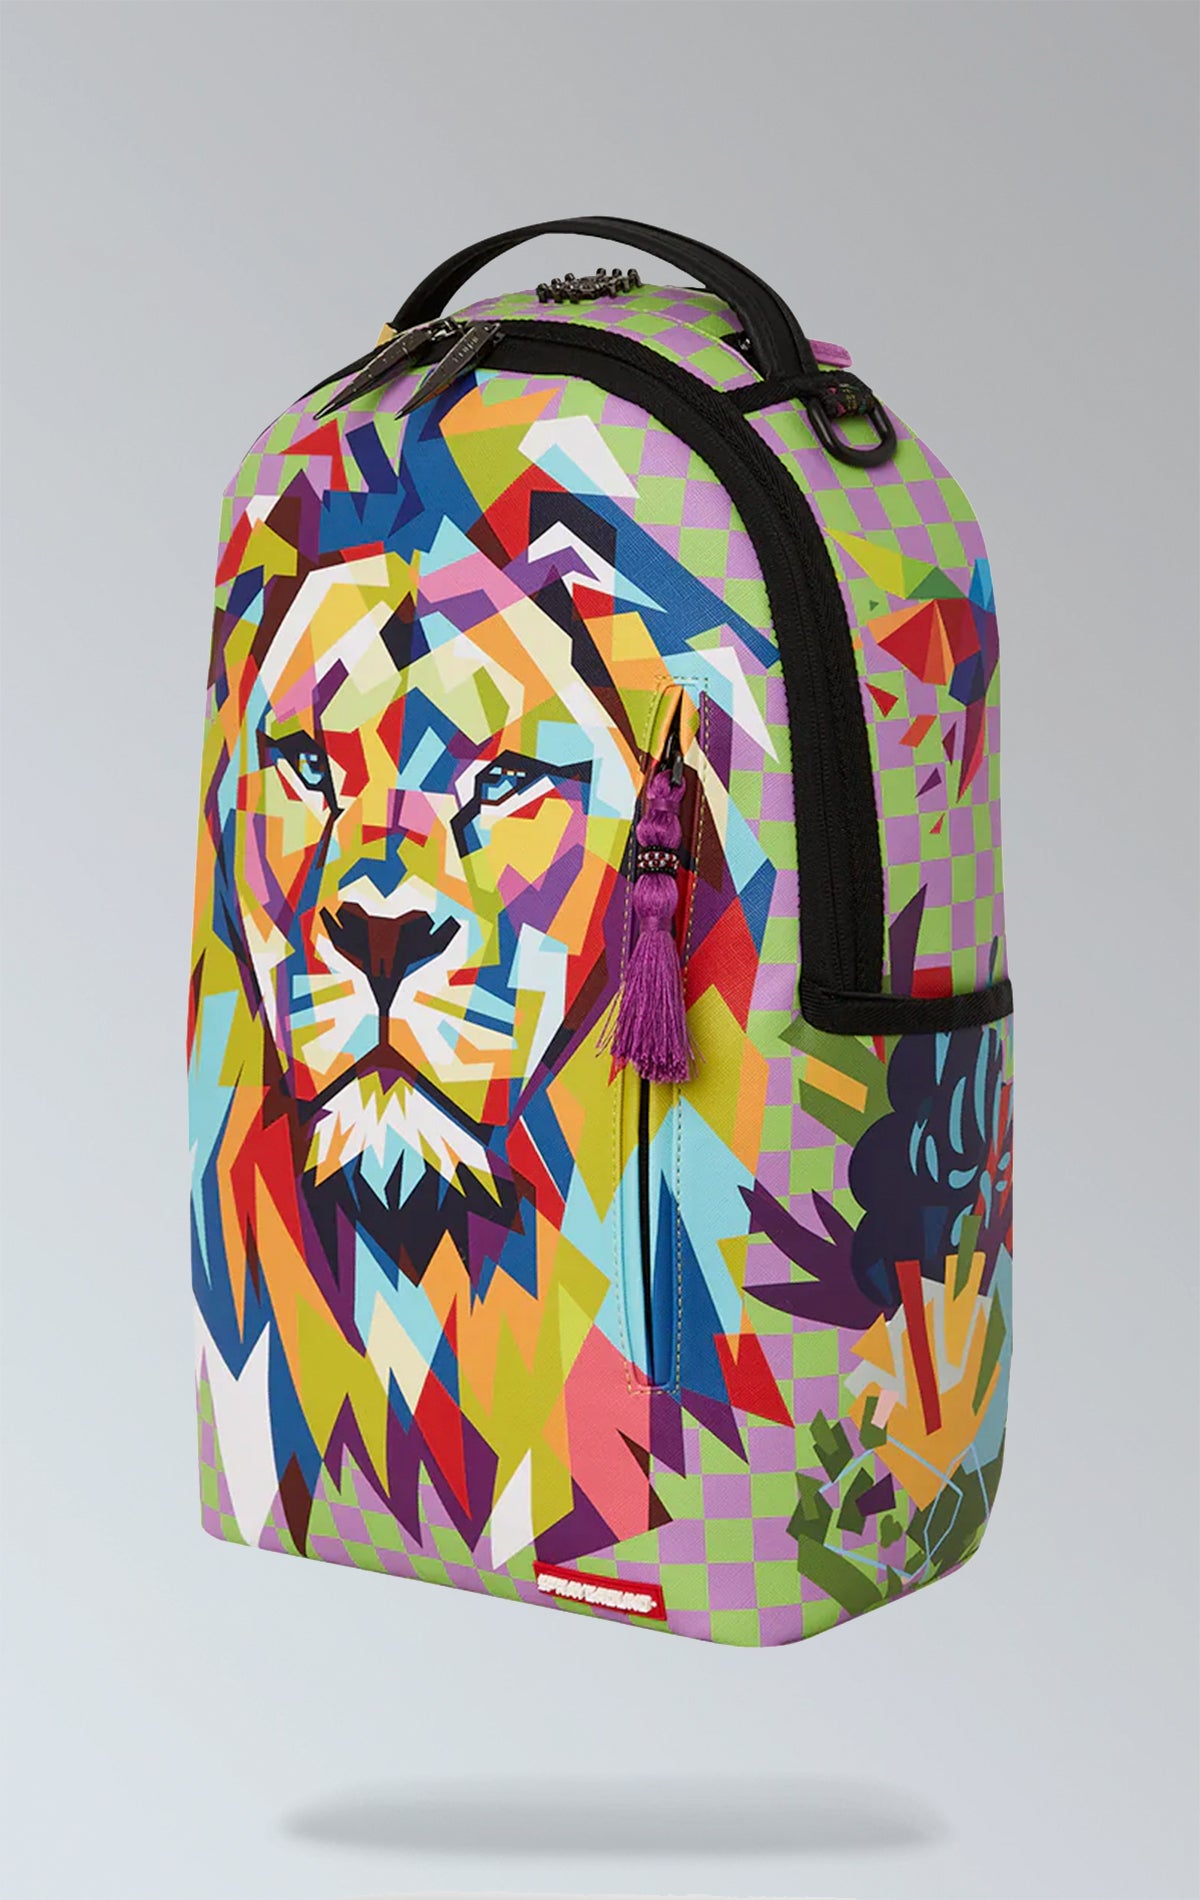 Colorful Sprayground DLXSV backpack with eye-catching AI-inspired graphic, featuring separate velour laptop & sunglass compartments, padded back, and luggage sleeve.